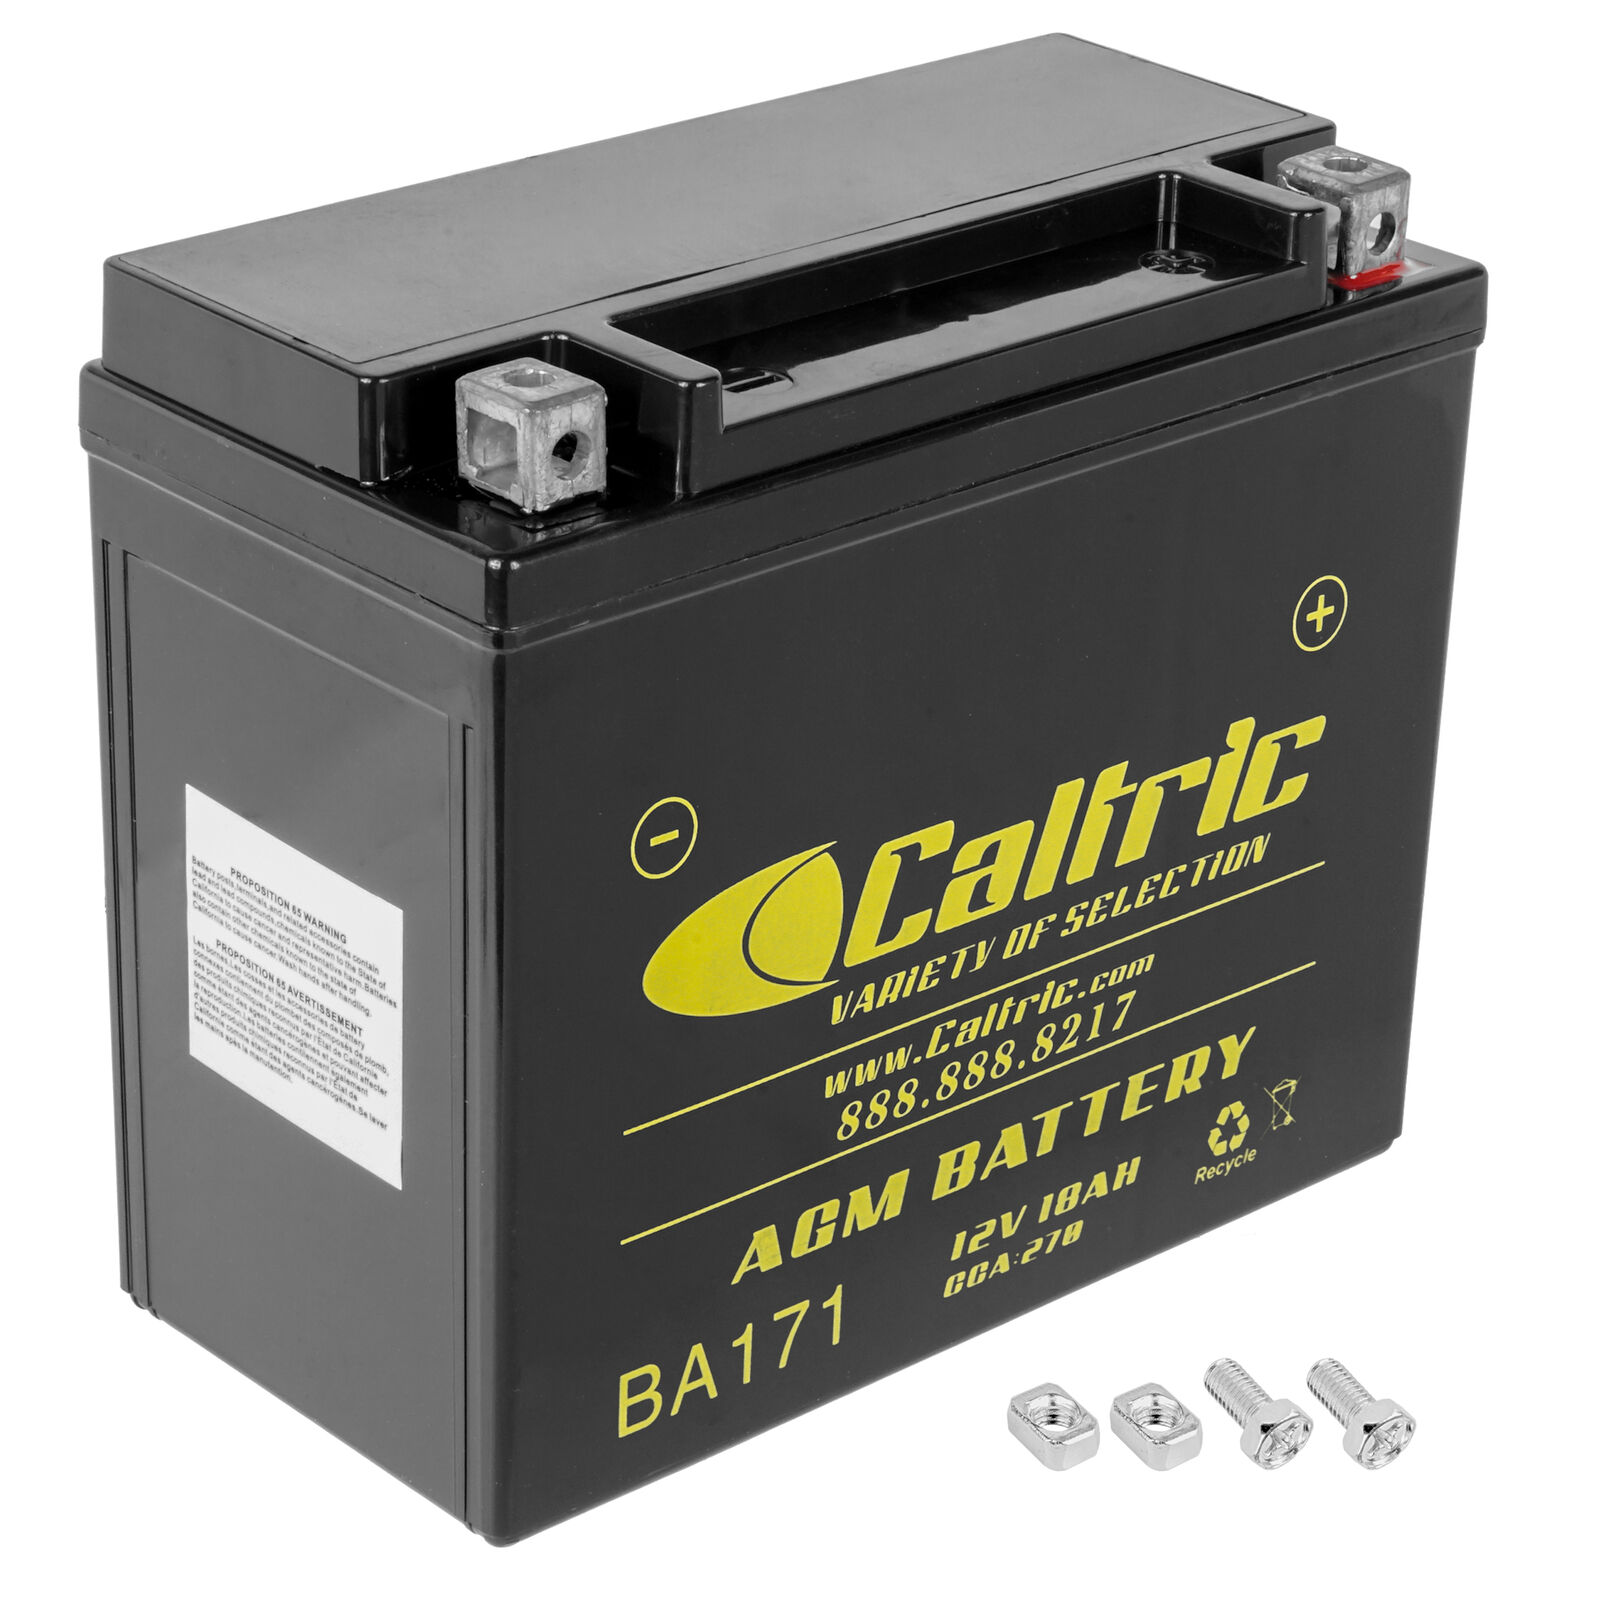 AGM Battery for Seadoo GTI GTS 1995 1996 1997 1998 1999 2000 2001